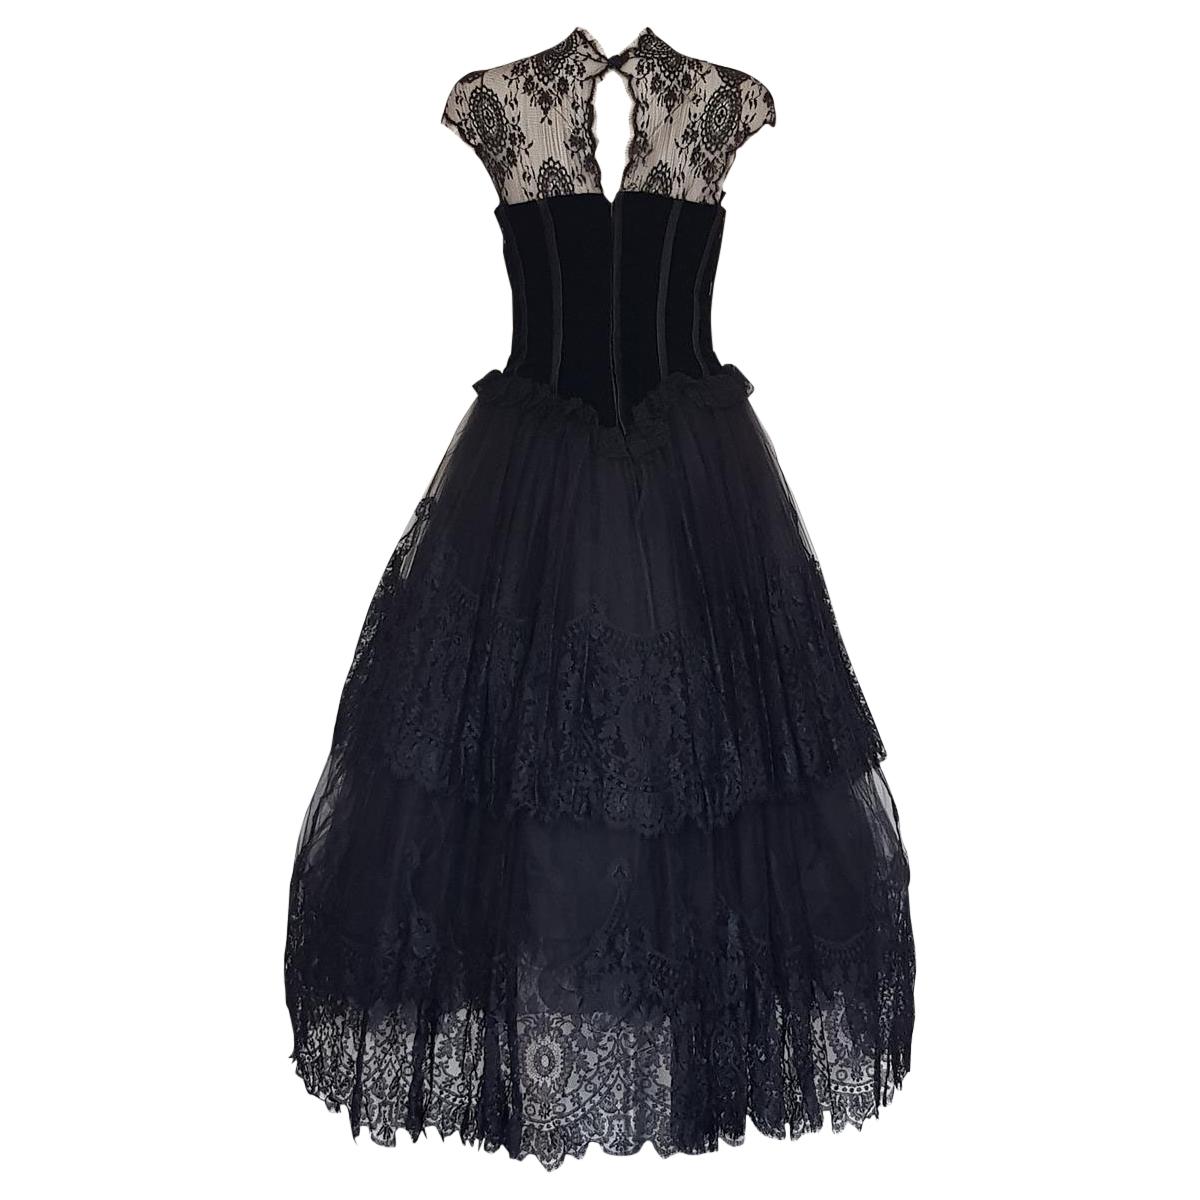 Spectacular dress by Valentino Boutique
Year 1991
Incredible construction of lace and 7 different tulle flounces
Black color
Velvet bustier
Two central bows
Sleeveless
Written size 10, but fits a S
Japanese Queen has the same one but in red
Made in